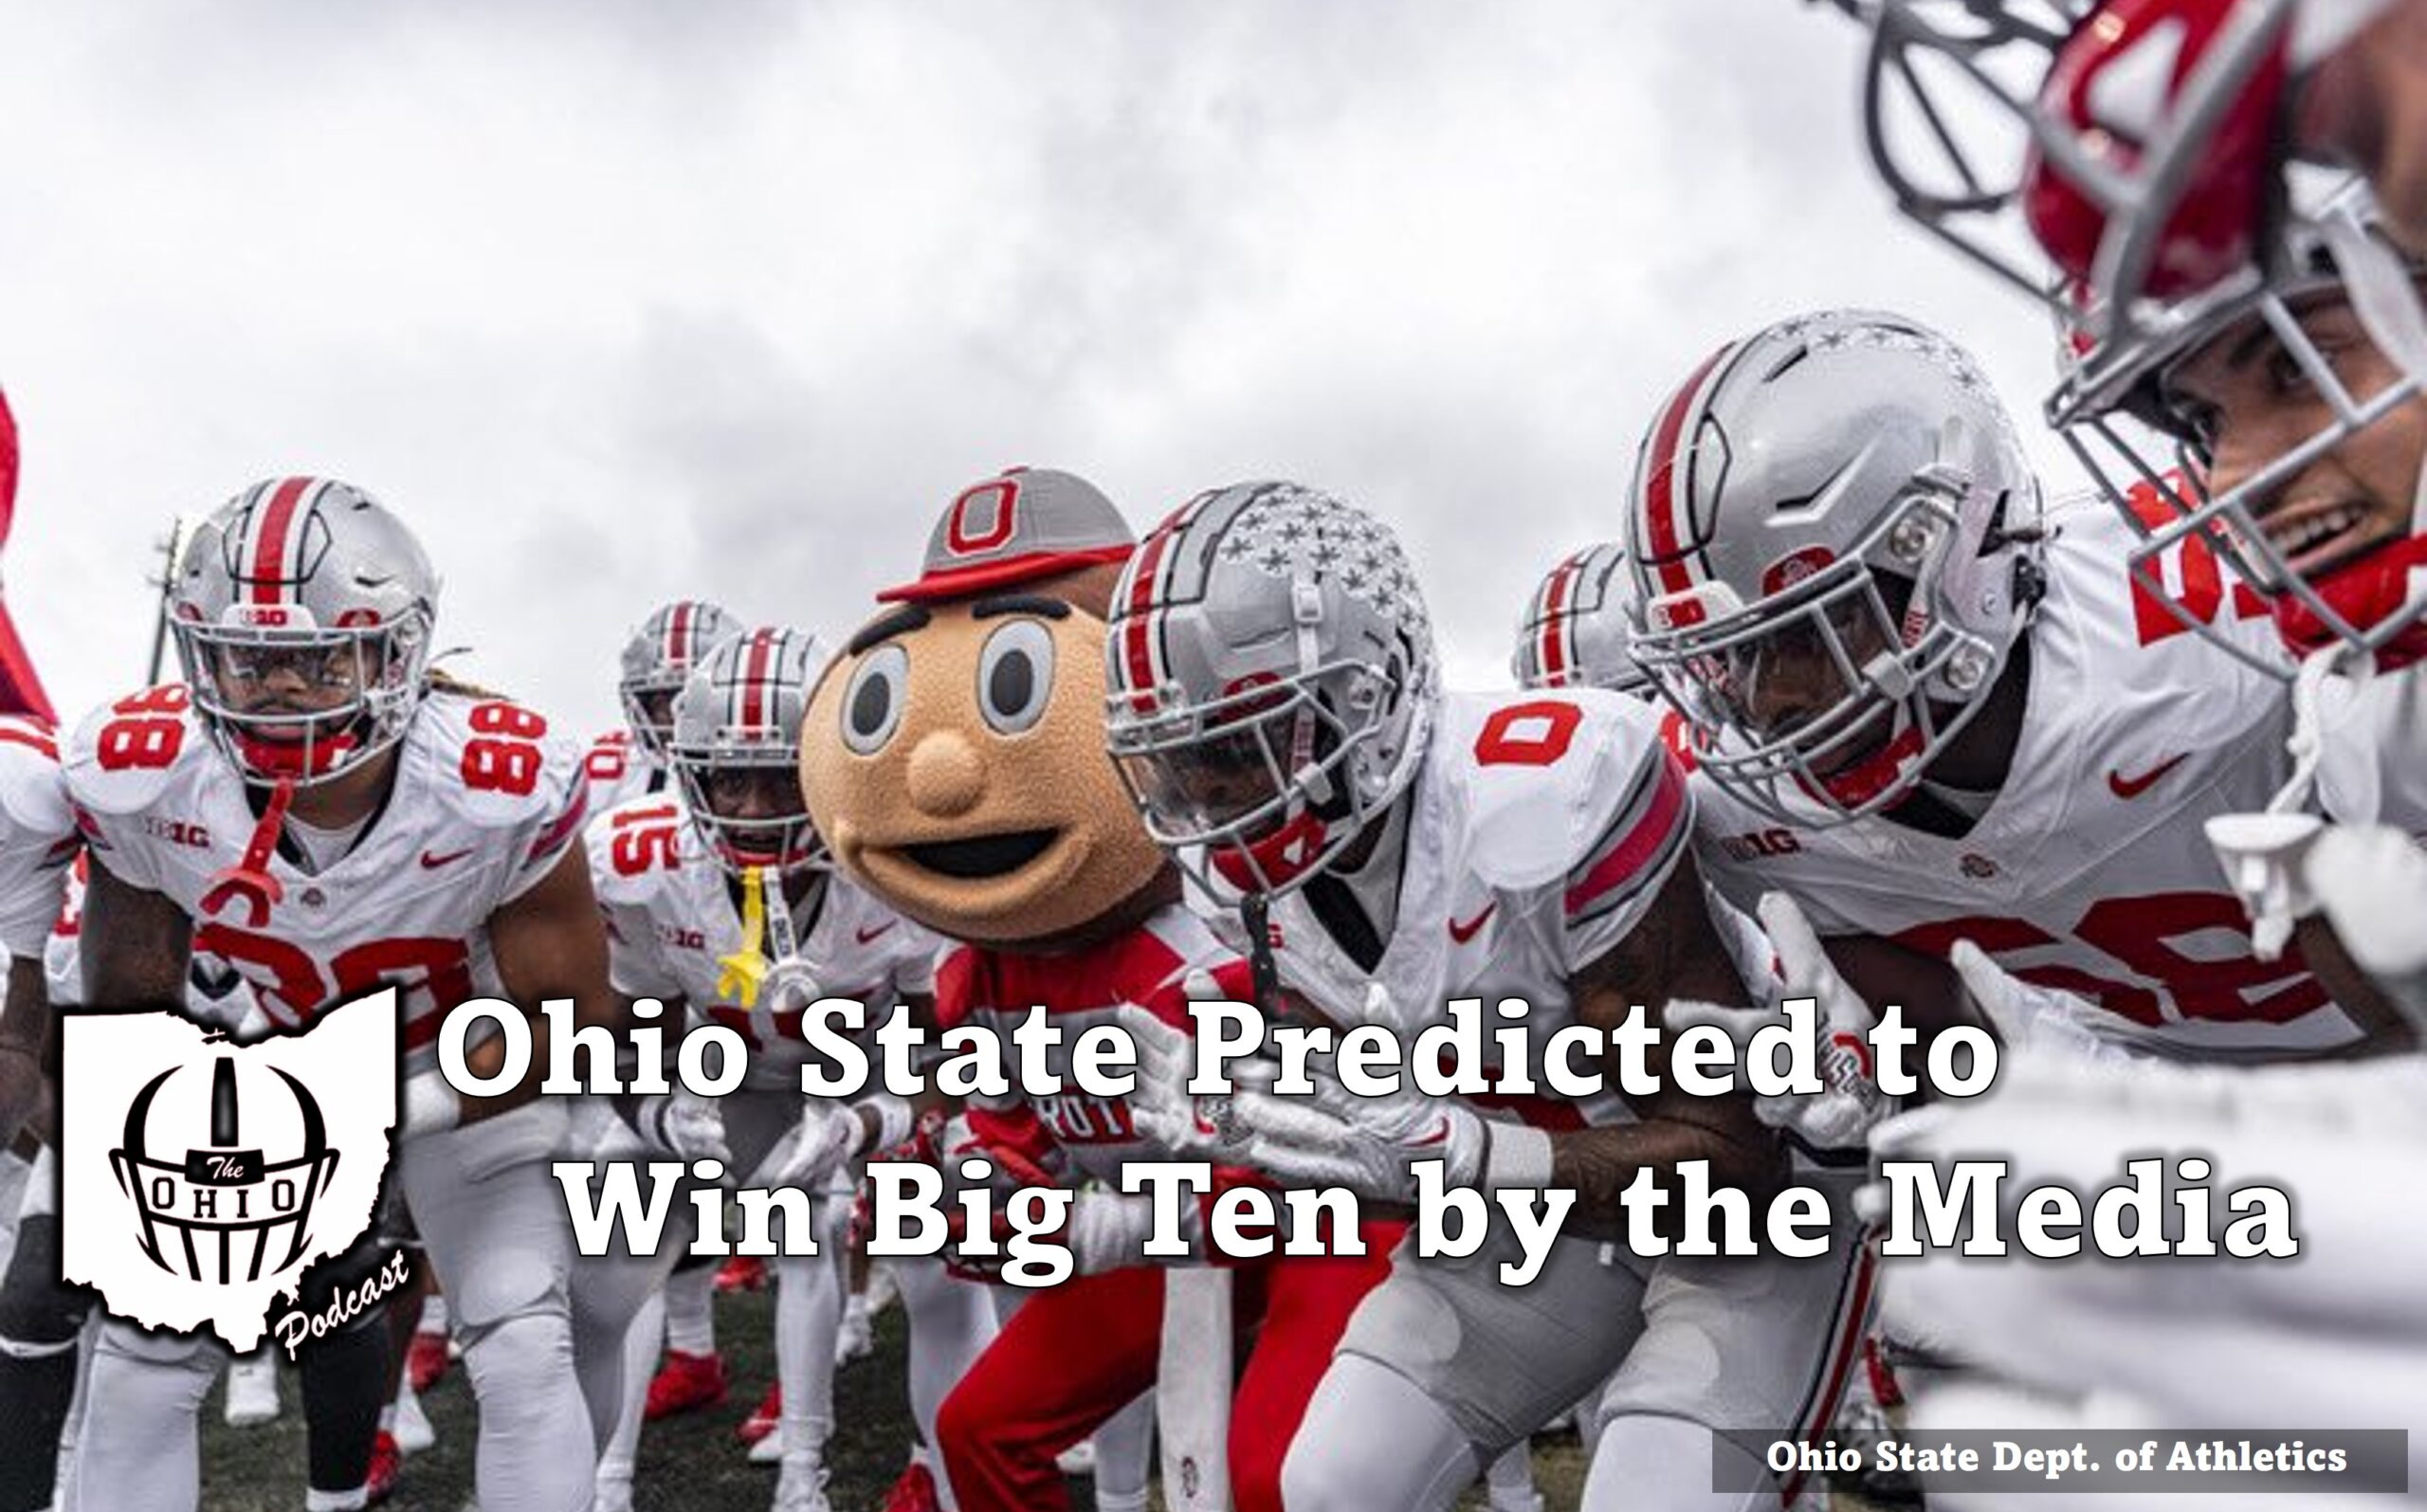 Ohio State Predicted to Win Big Ten by the Media.